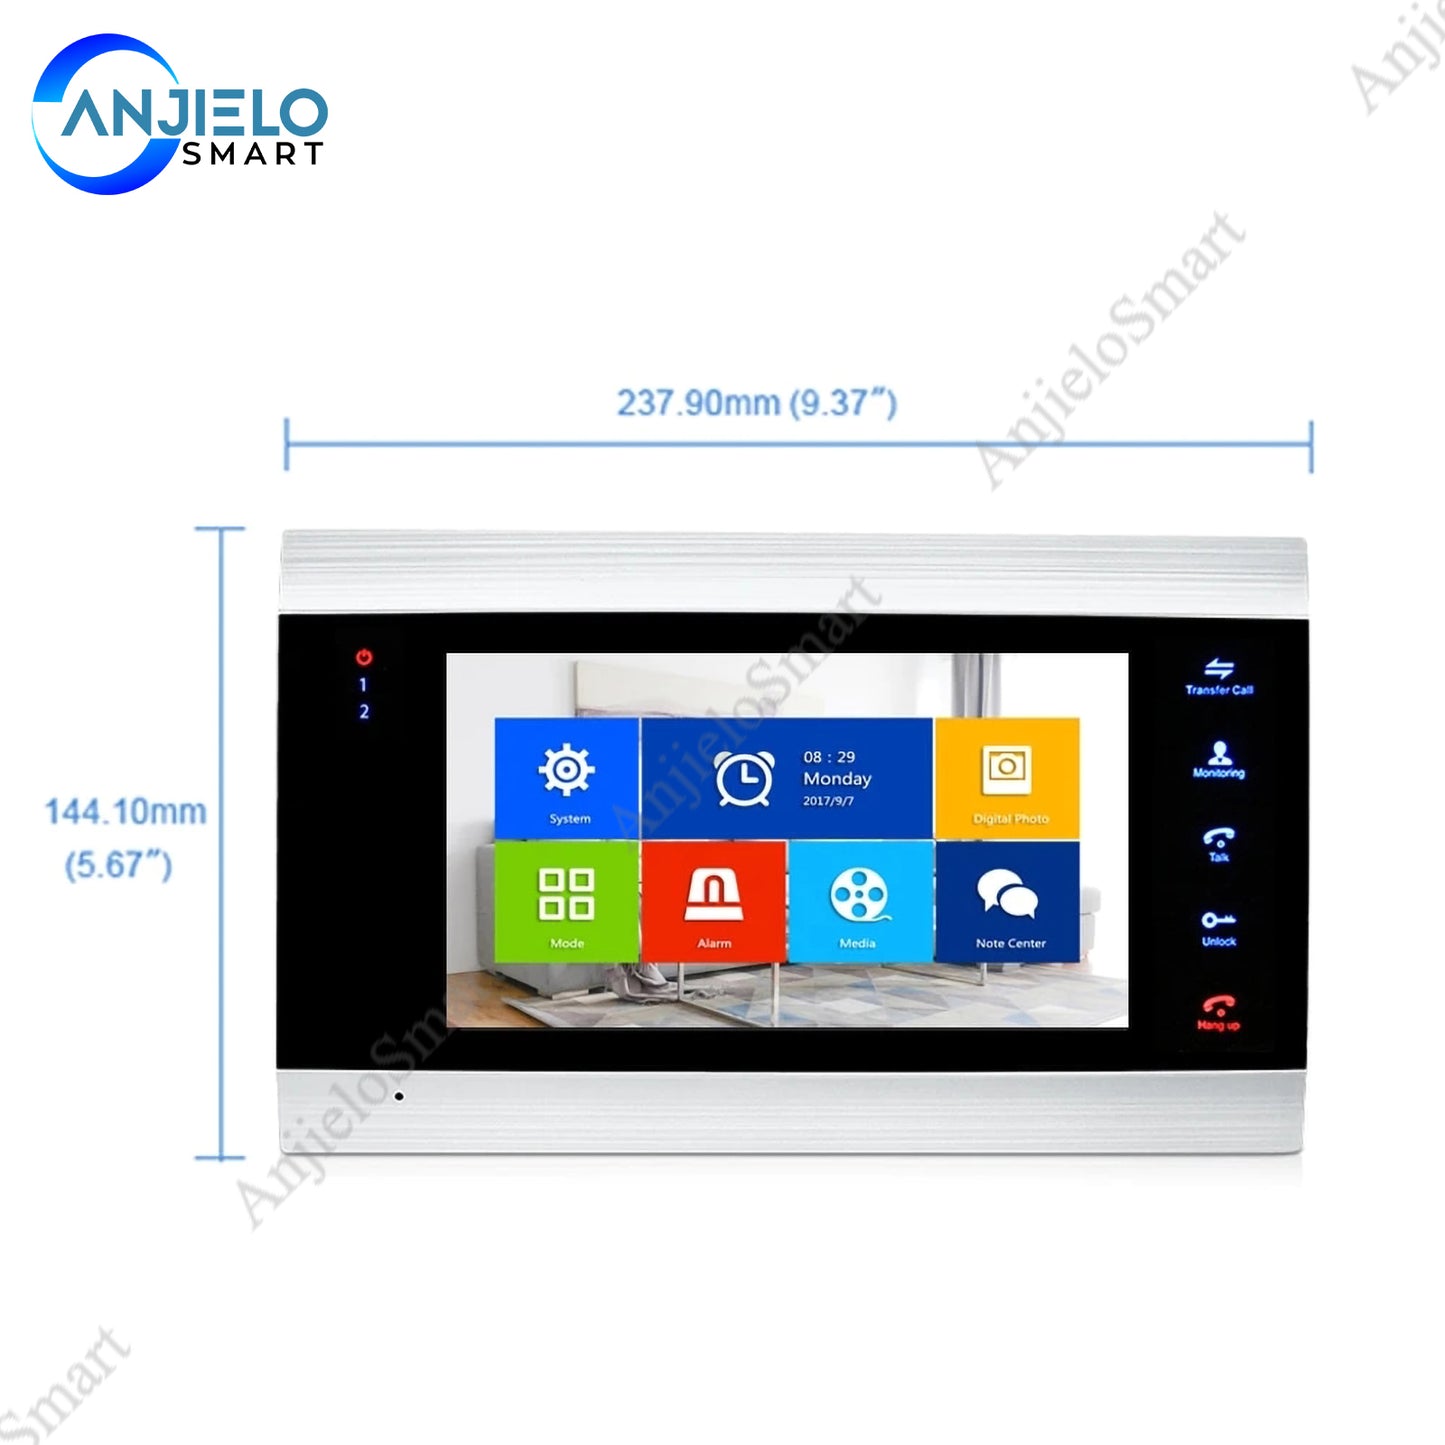 AnjieloSmart 1080P/AHD 7 inch Video Intercom Security System Voice message/Motion Detection (Monitor Only)